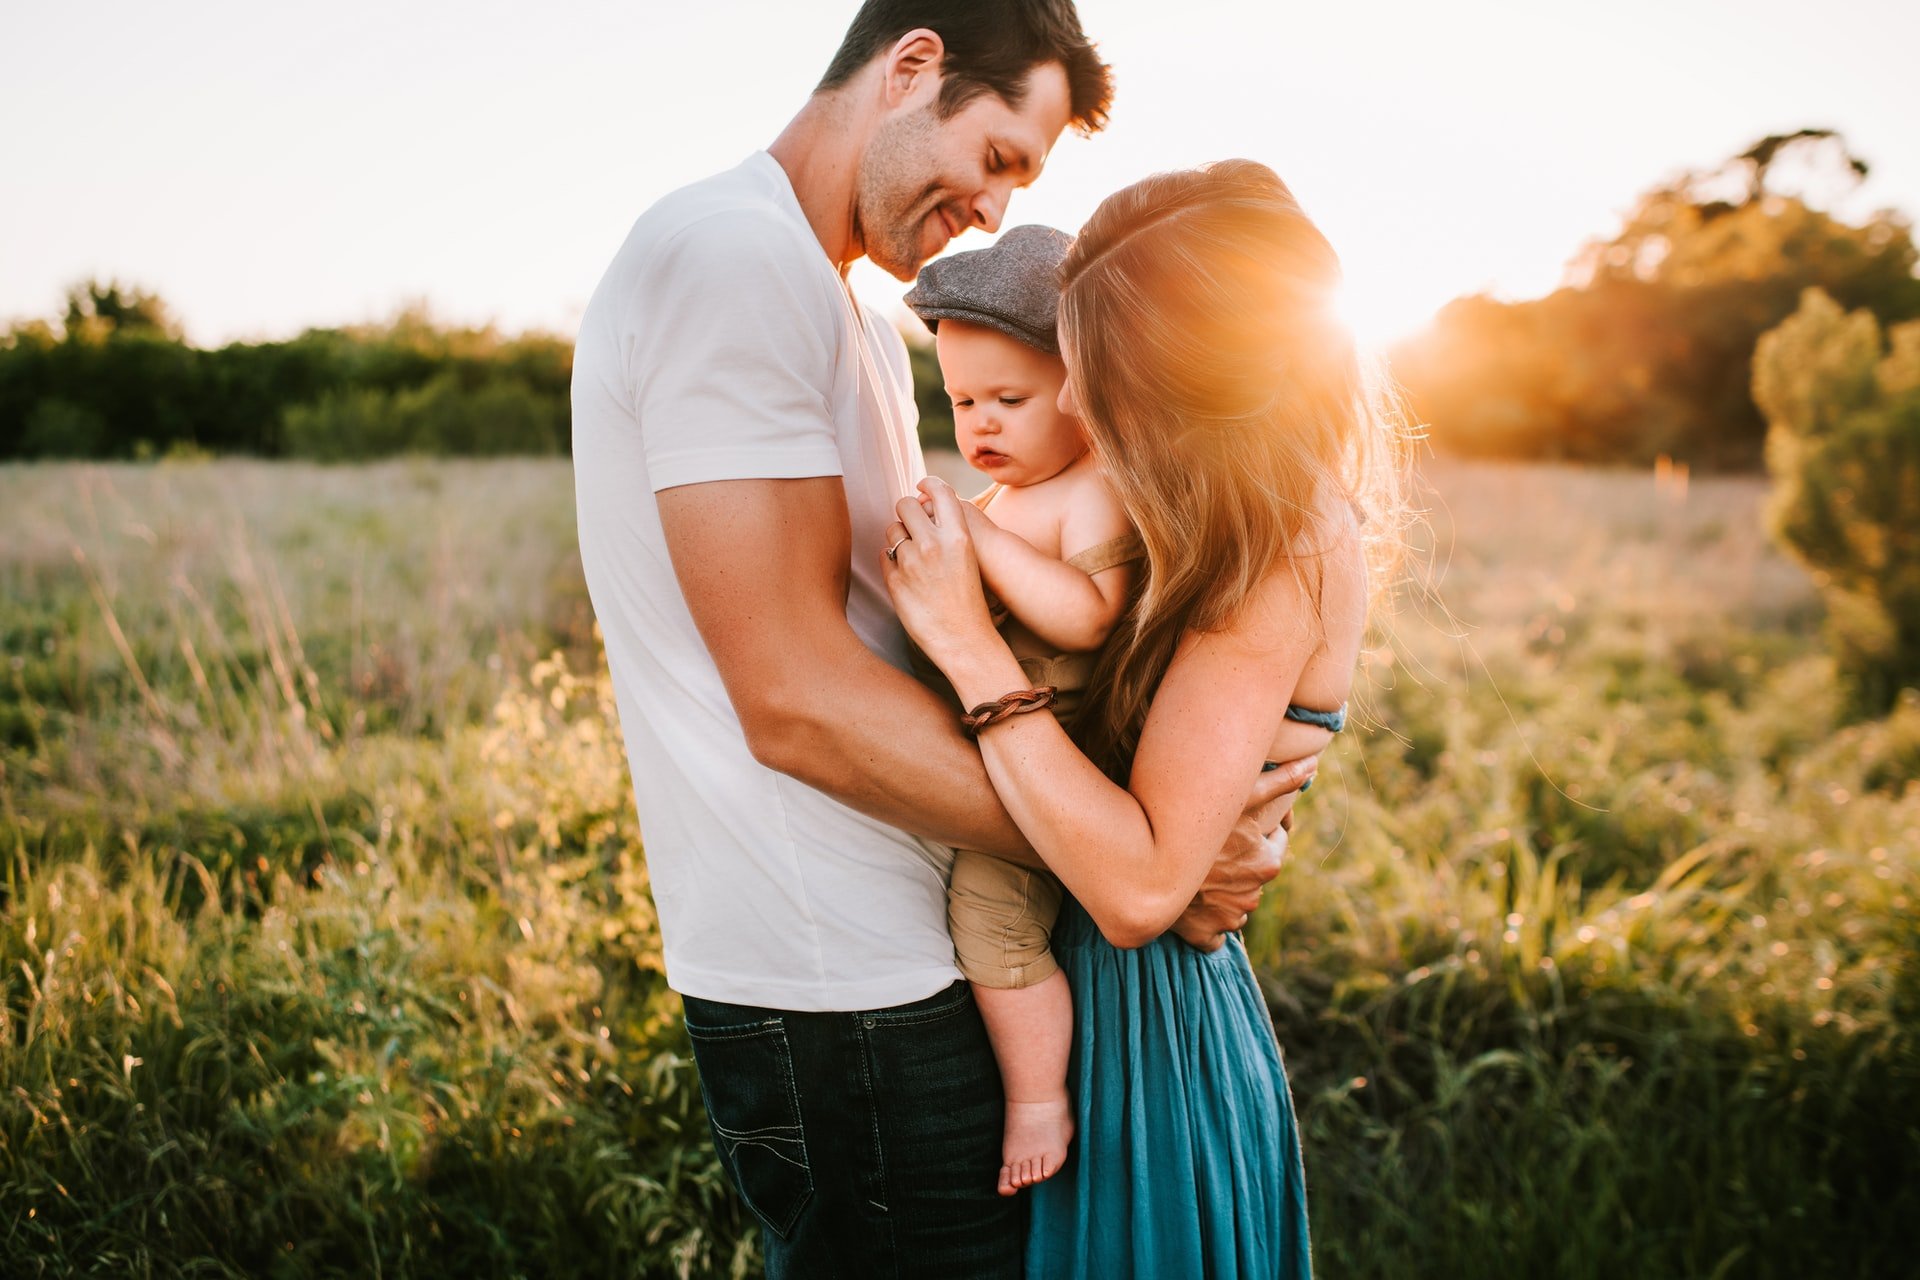 Photo of a happy family his girlfriend was looking at | Source: Unsplash